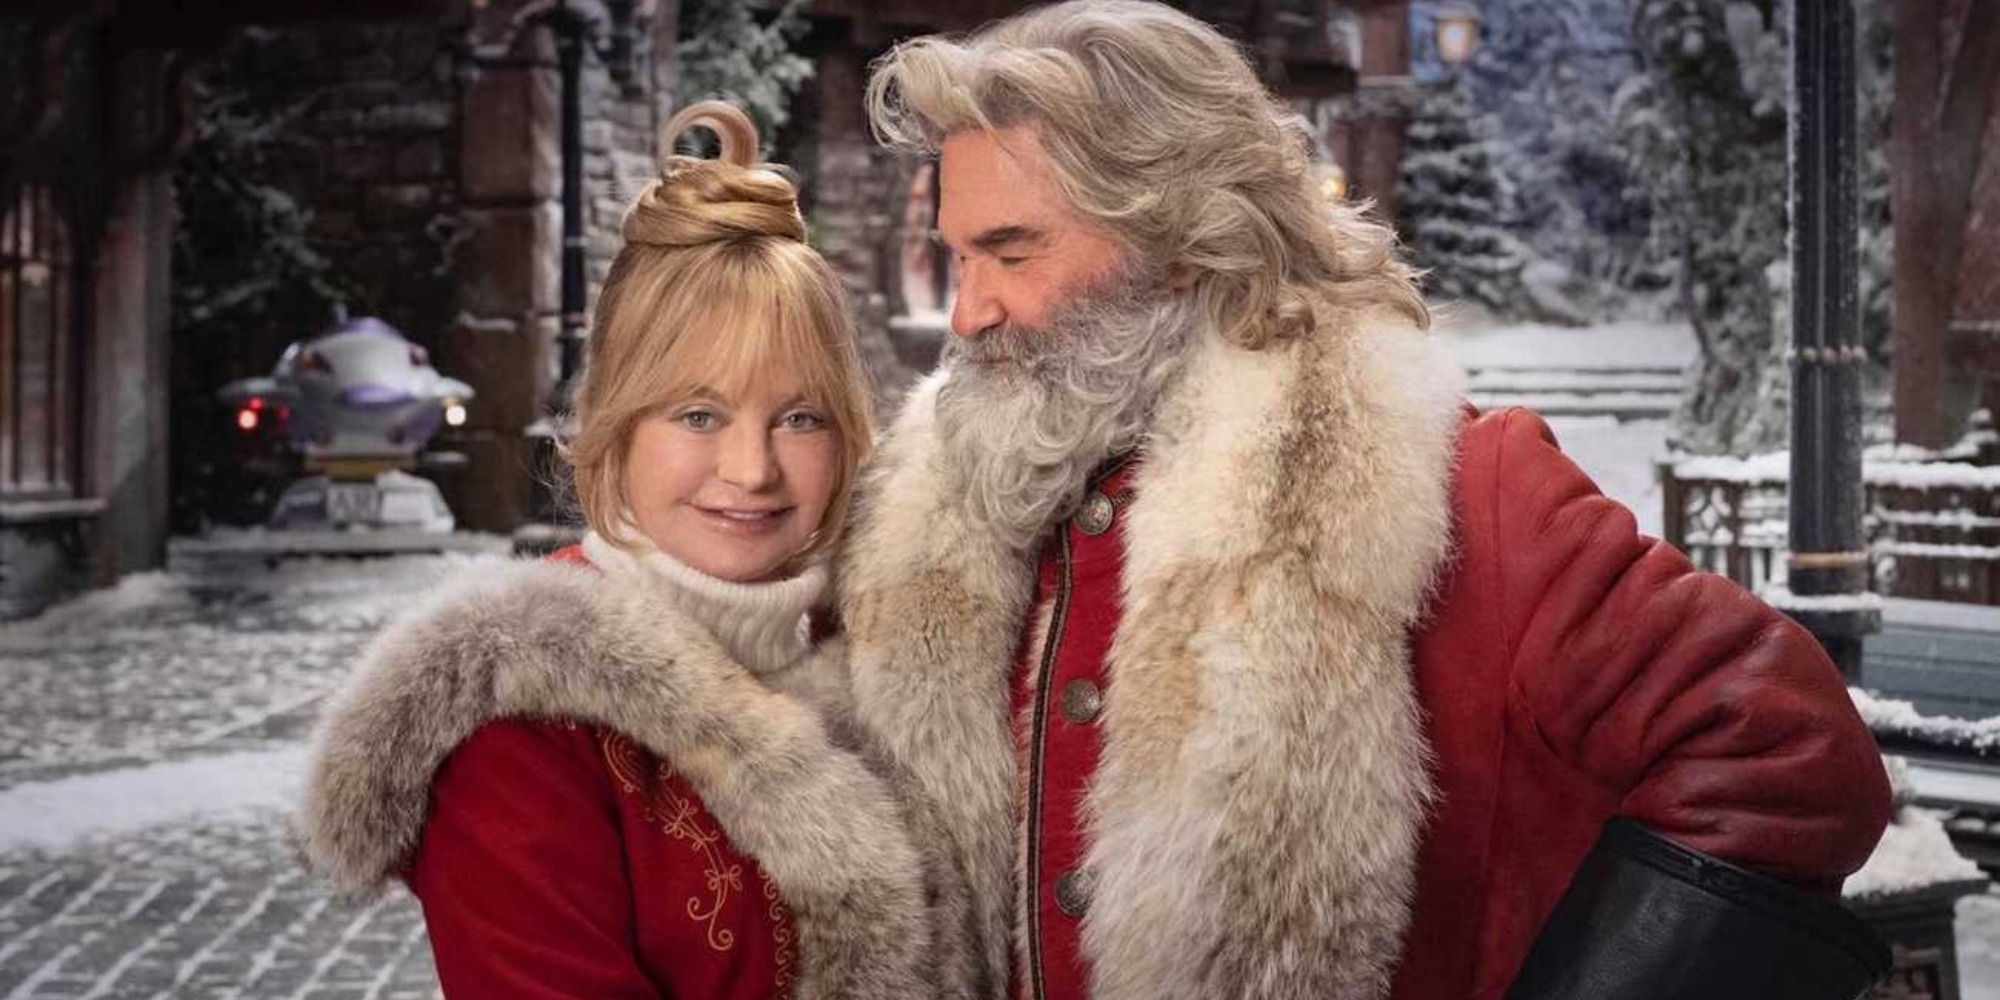 A screenshot of Goldie Hawn's Mrs. Claus and Kurt Russell's Santa Claus in The Christmas Chronicles: Part Two